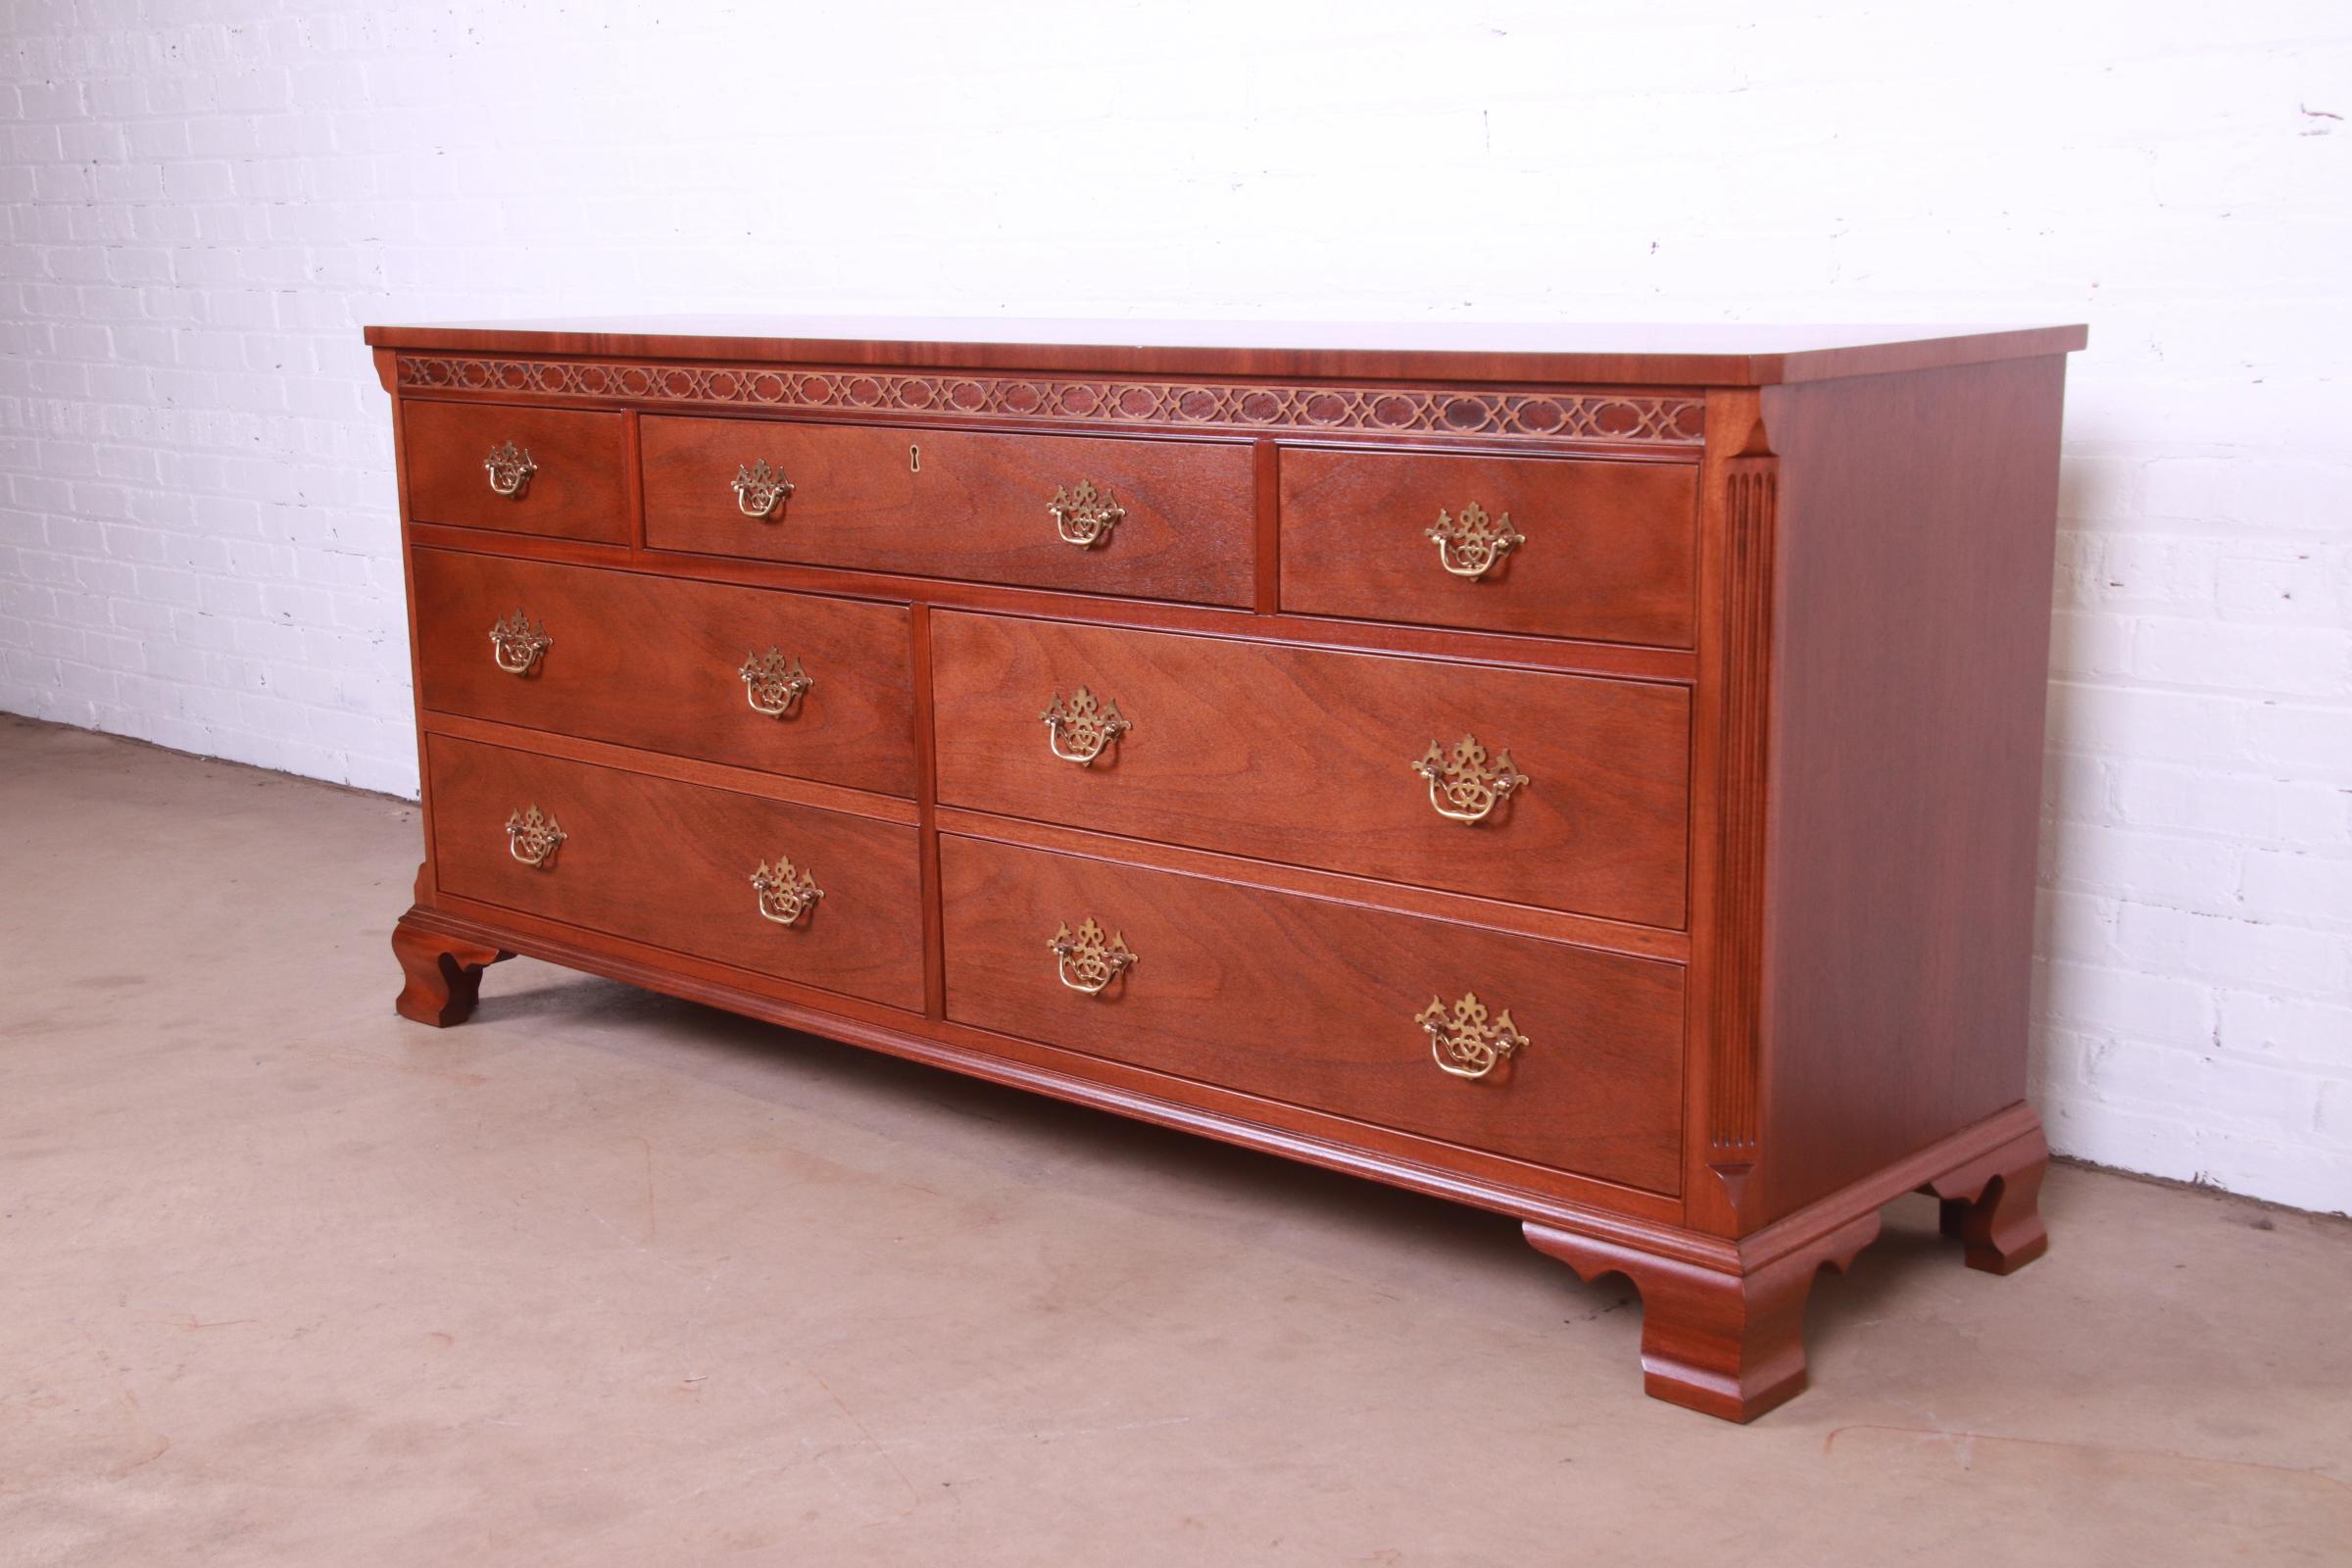 A gorgeous Georgian or Chippendale style seven-drawer dresser or credenza.

By Hickory Chair Company, 